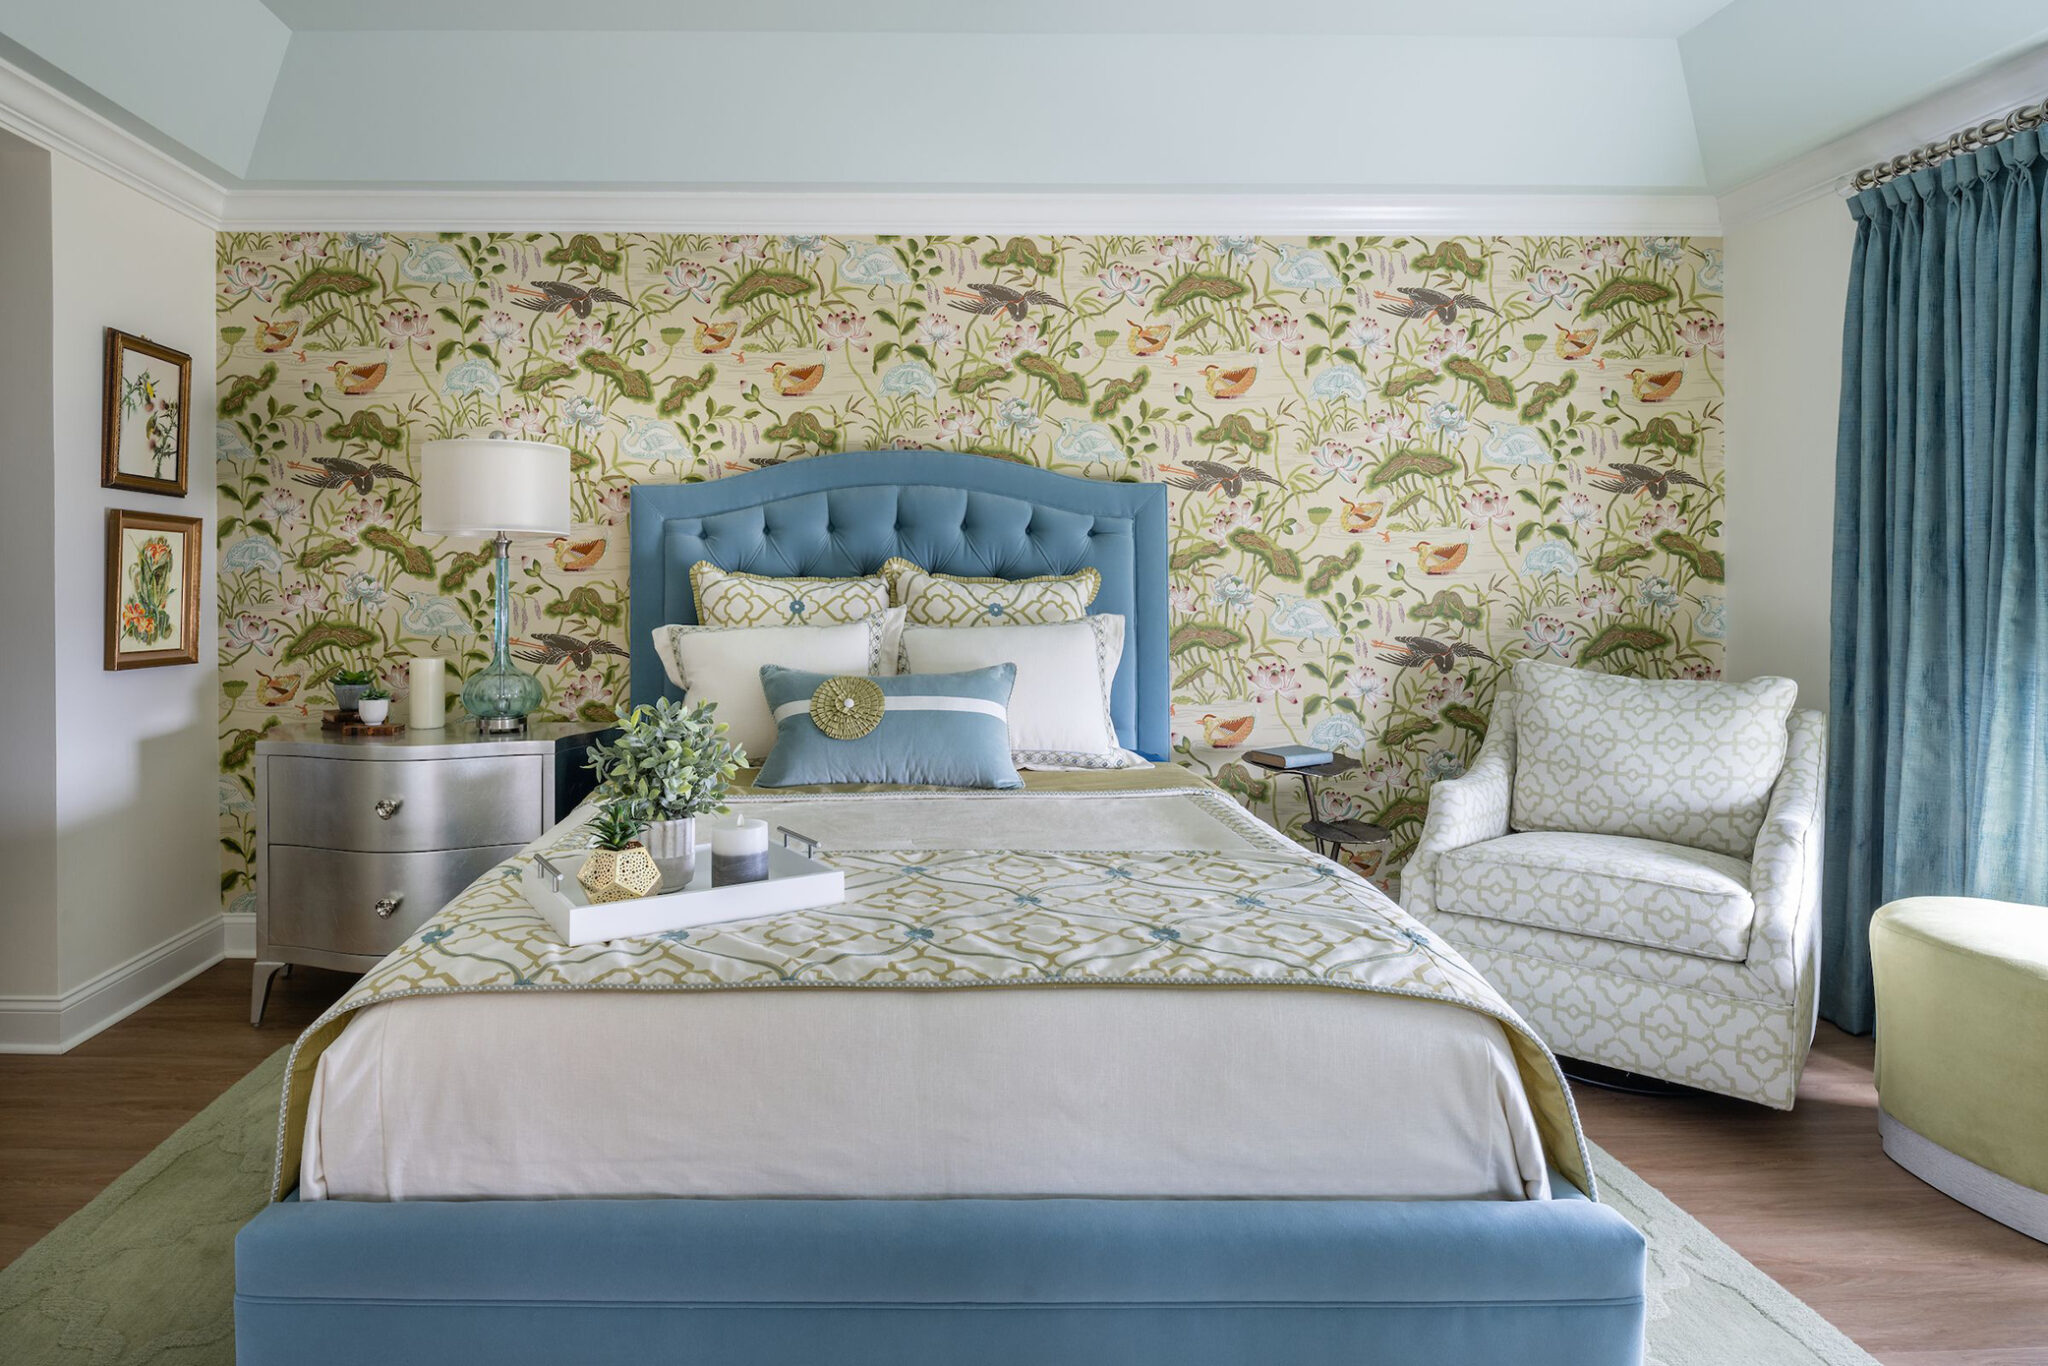 Bedroom with floral accent wallpaper, a blue bed frame, and matching blue drapes